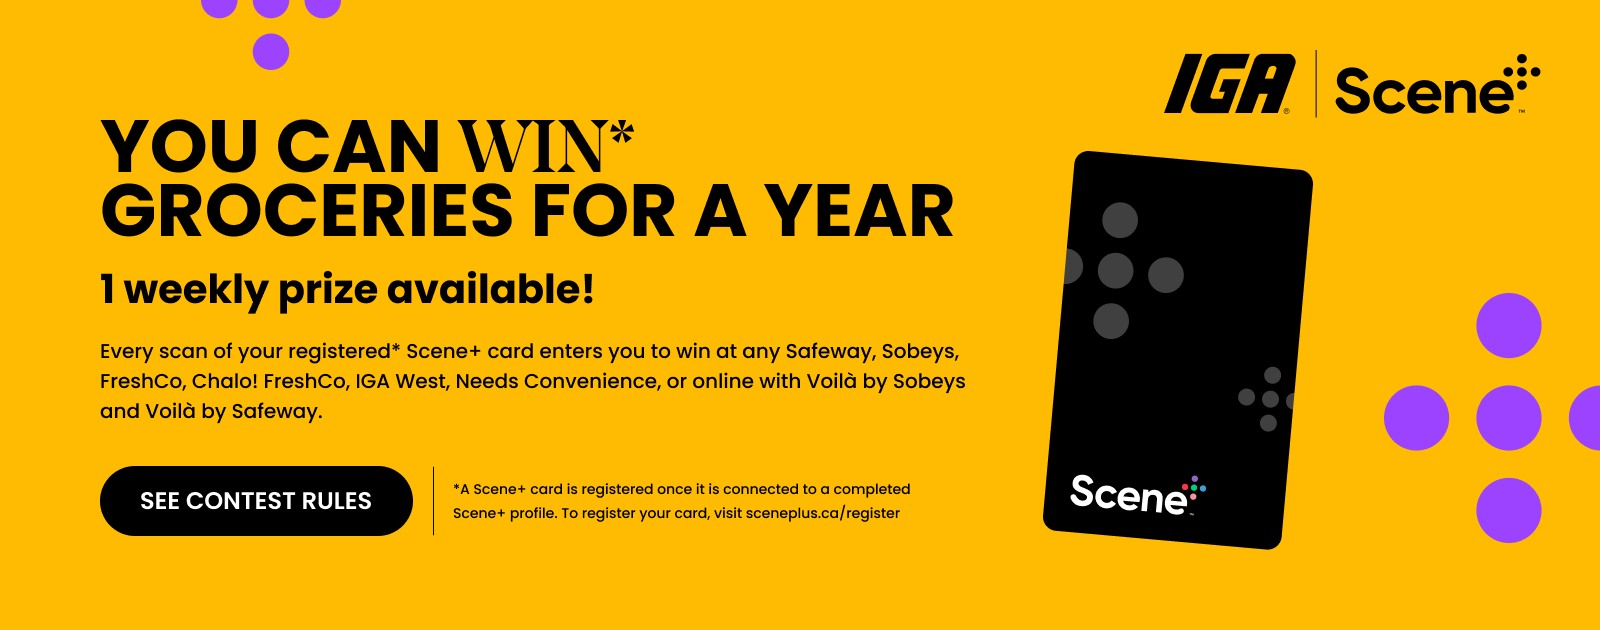 Text Reading 'You can win* groceries for a year. 1 weekly prize available! Every scan of your registered* Scene+ card enters you to win at any Safeway, Sobeys, FreshCo, Chalo! FreshCo, IGA West, Needs Convenience, or online with Voilà by Sobeys and Voilà by Safeway. Click on 'See Contest Rules' button to learn more.'